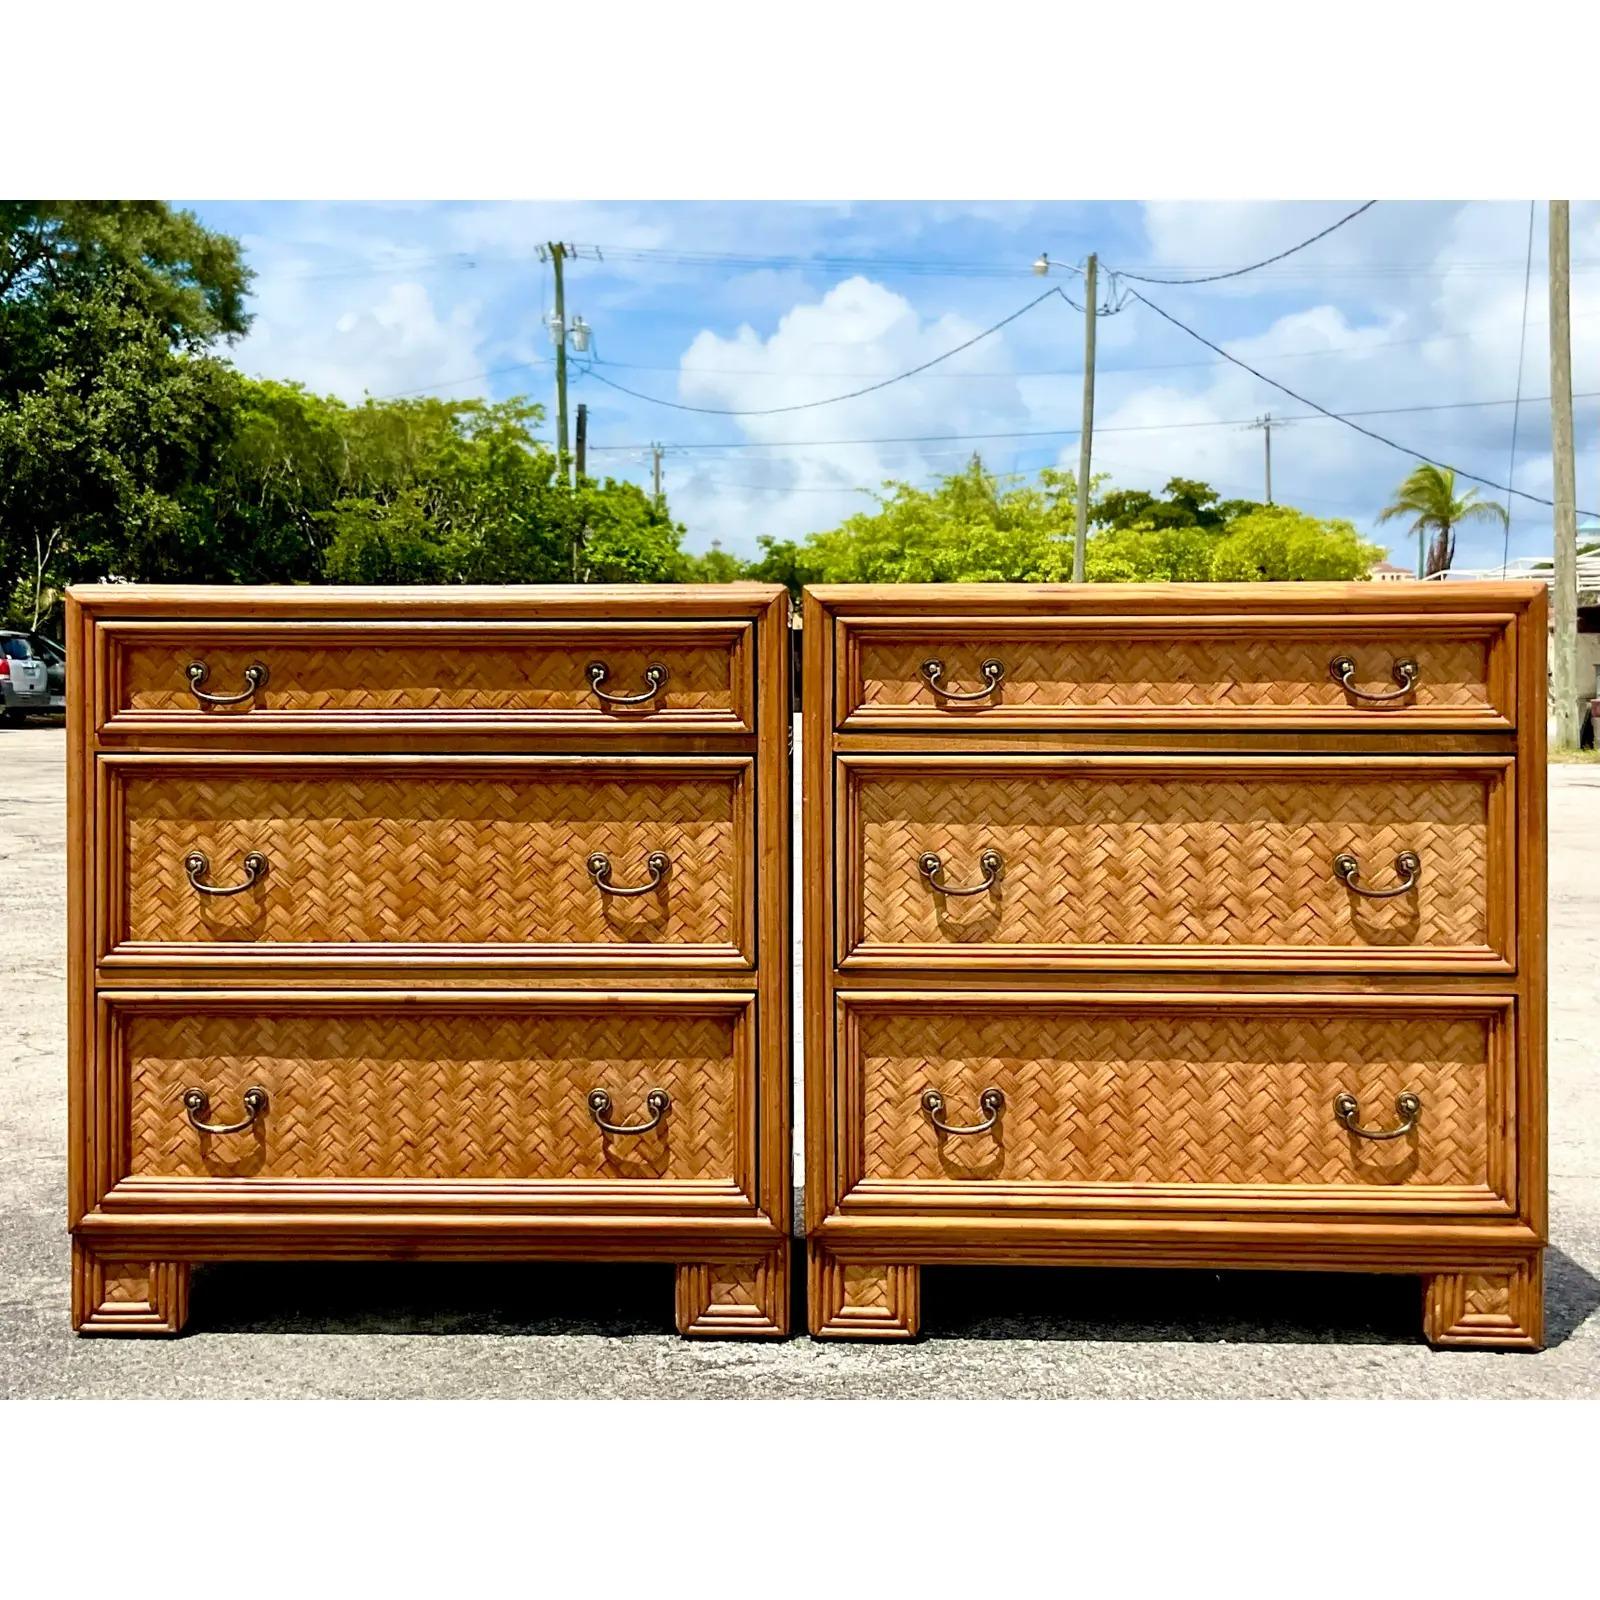 20th Century Vintage Coastal Woven Rattan Chest of Drawers, a Pair